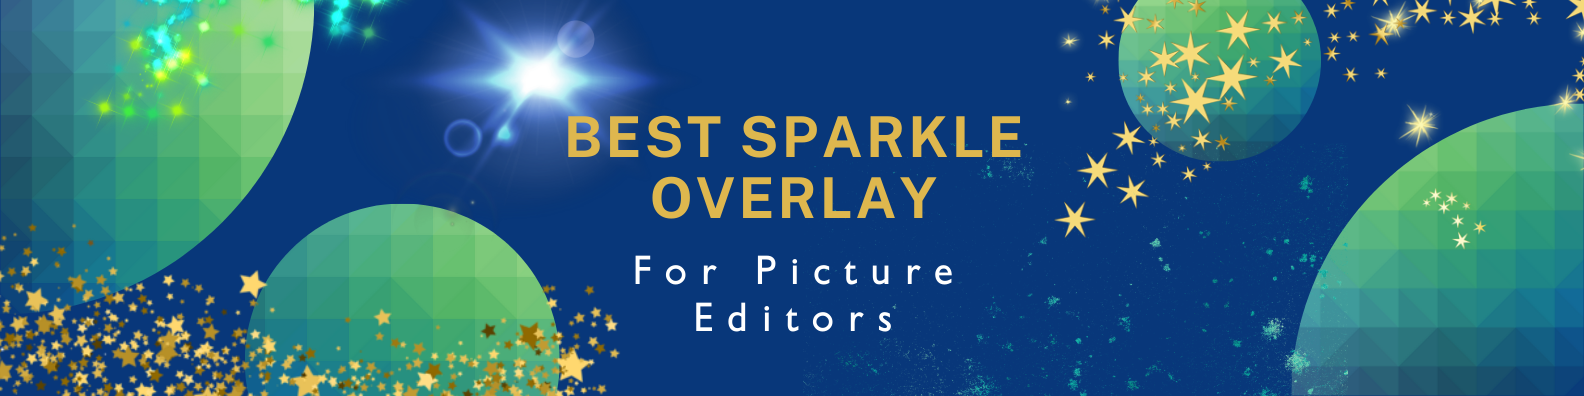 Best Sparkle Overlay For Picture Editors